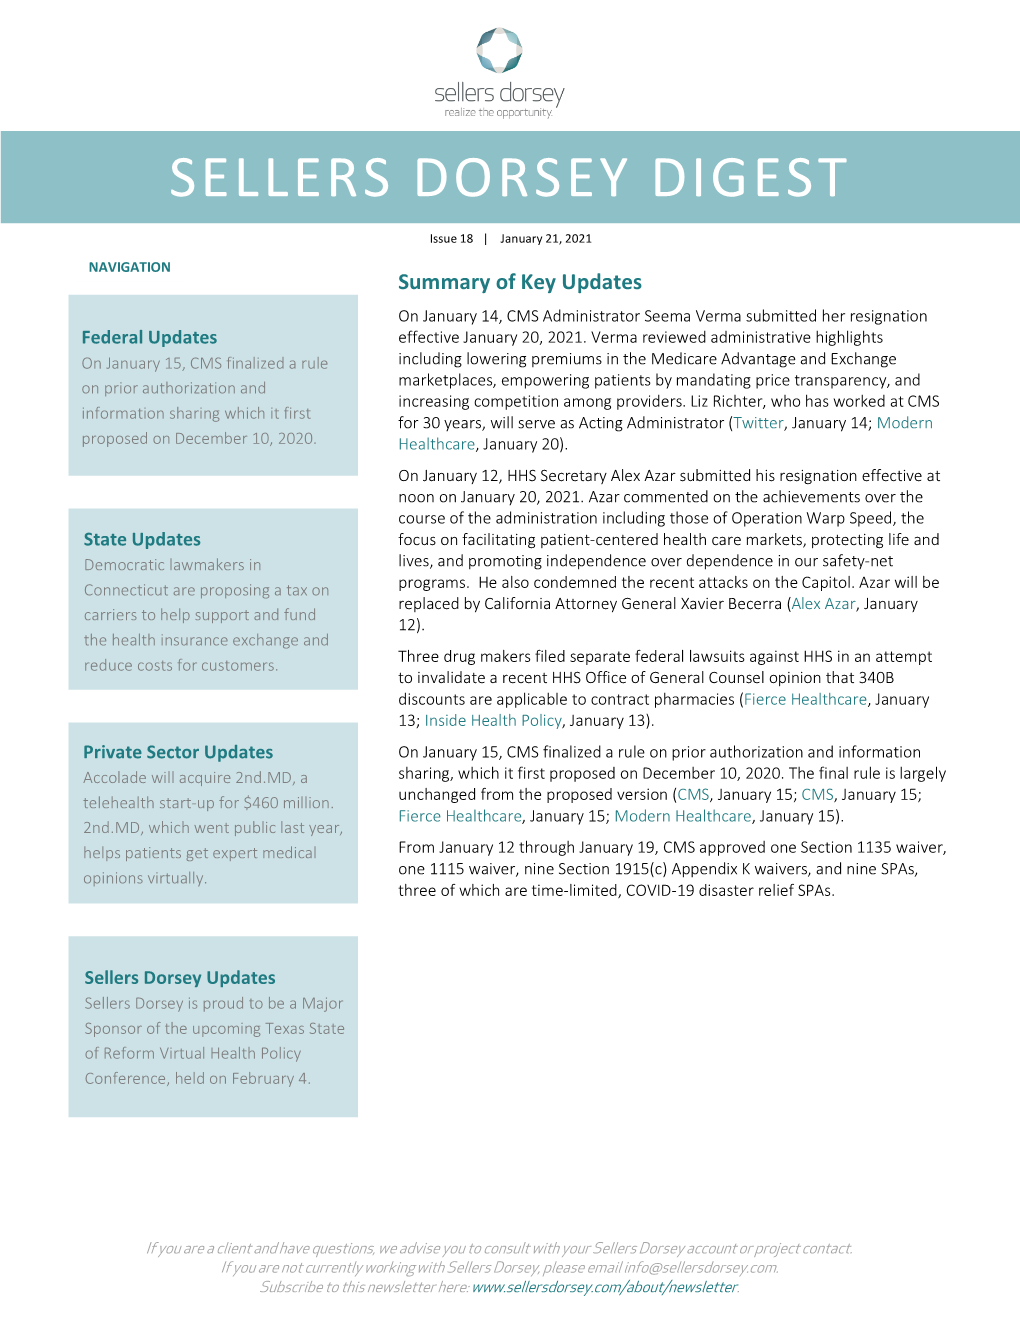 Sellers Dorsey Digest